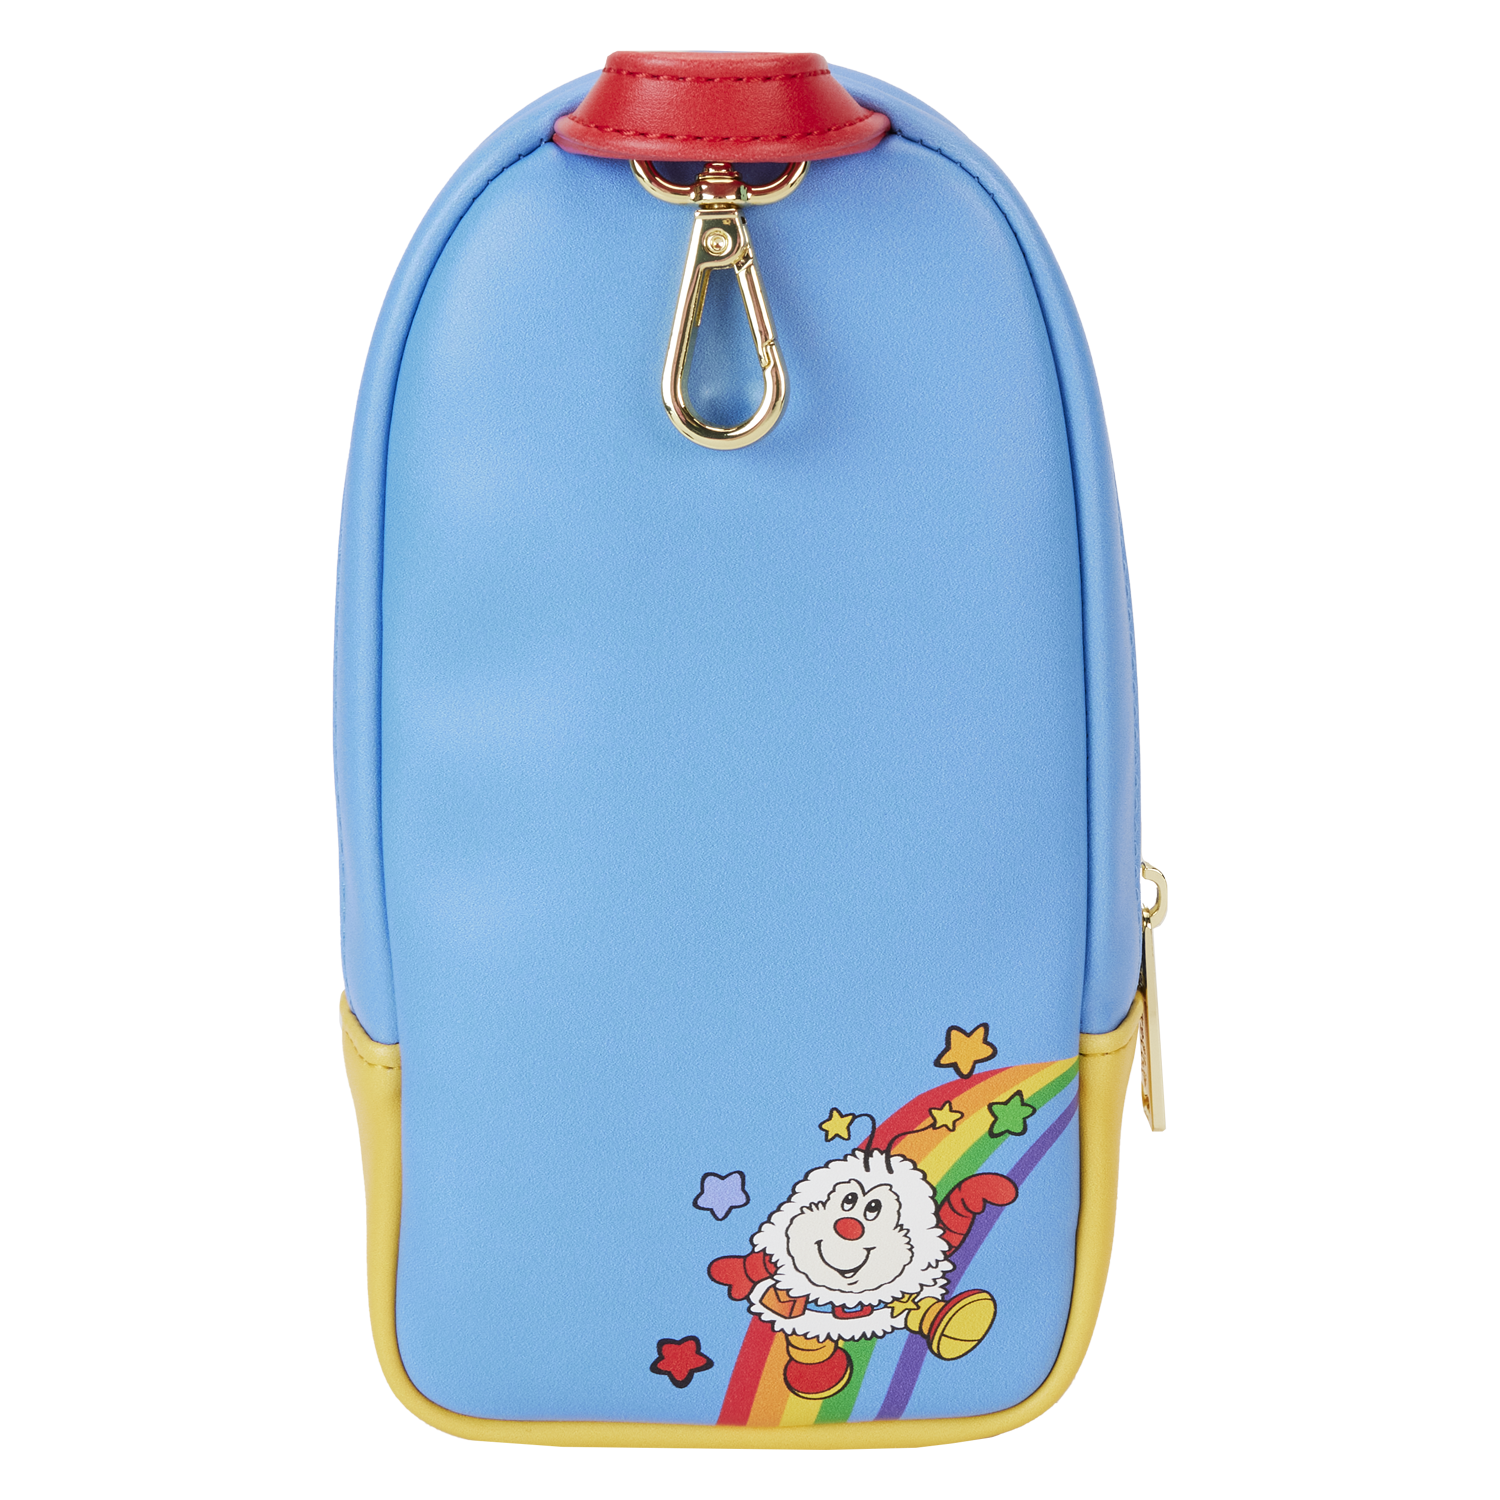 Loungefly Rainbow Brite - Castle Mini Backpack Pencil Case